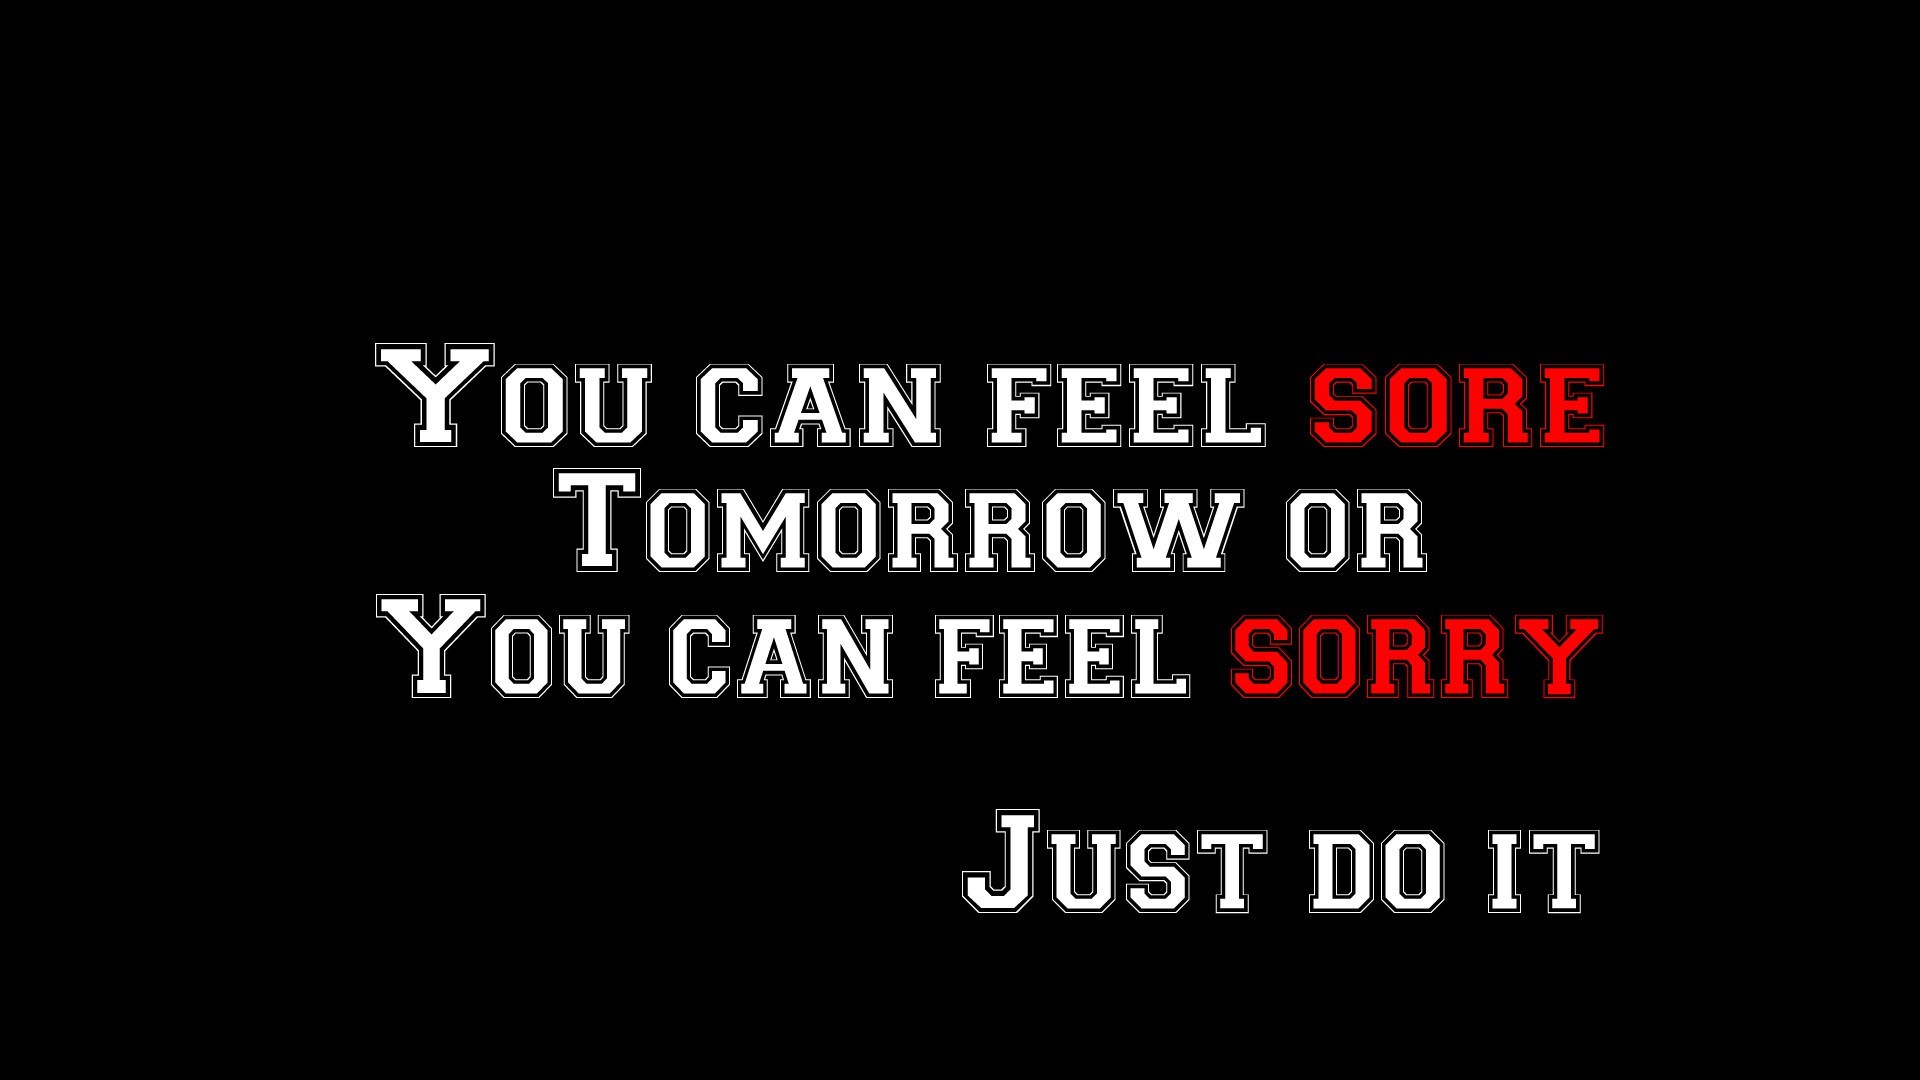 1920x1080 Just Do It Nike Motivational Quote Wallpaper Hd Beautiful Motivational  Workout Wallpaper 75 Images Of Just